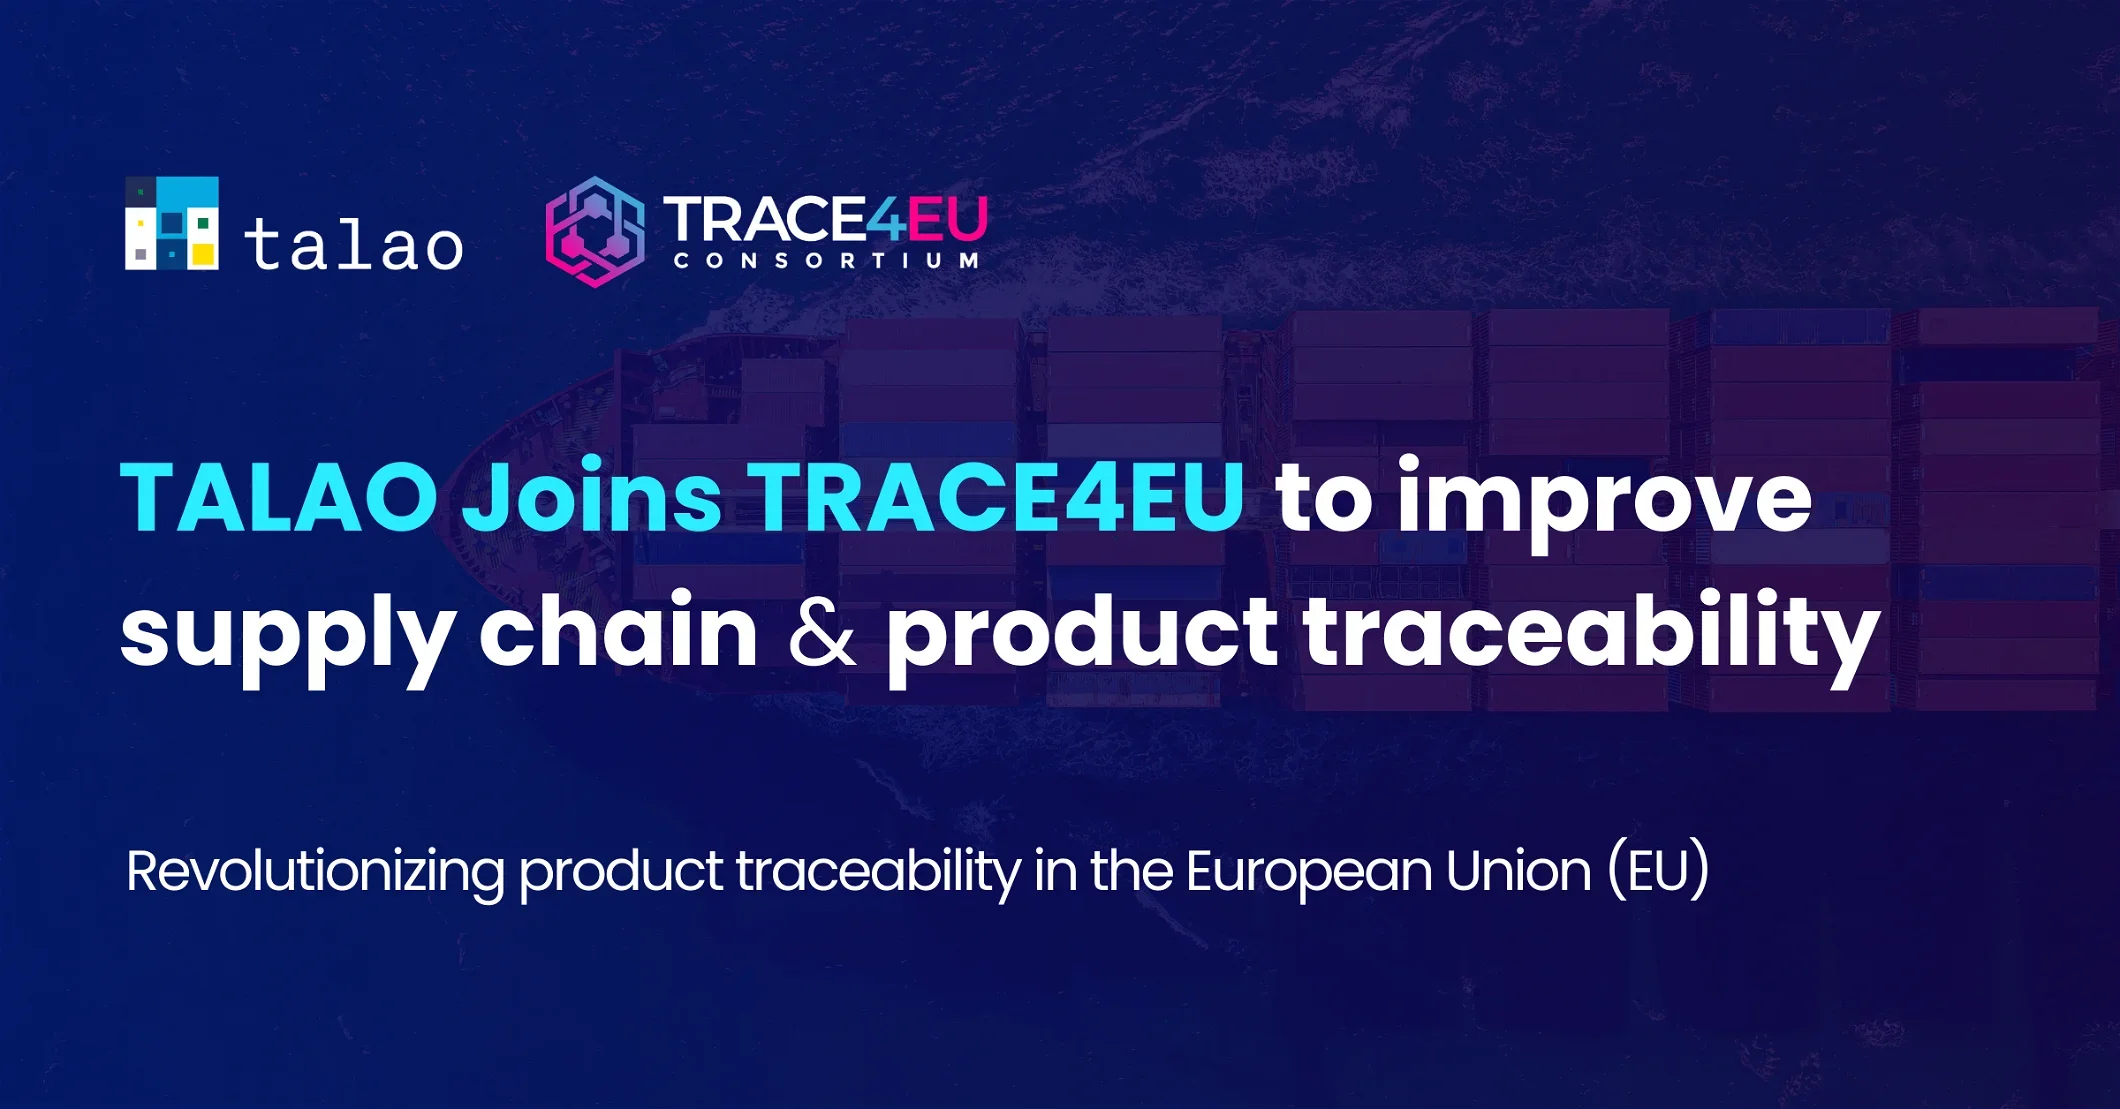 Talao joins Trace4EU consortium to improve supply chain in the EU